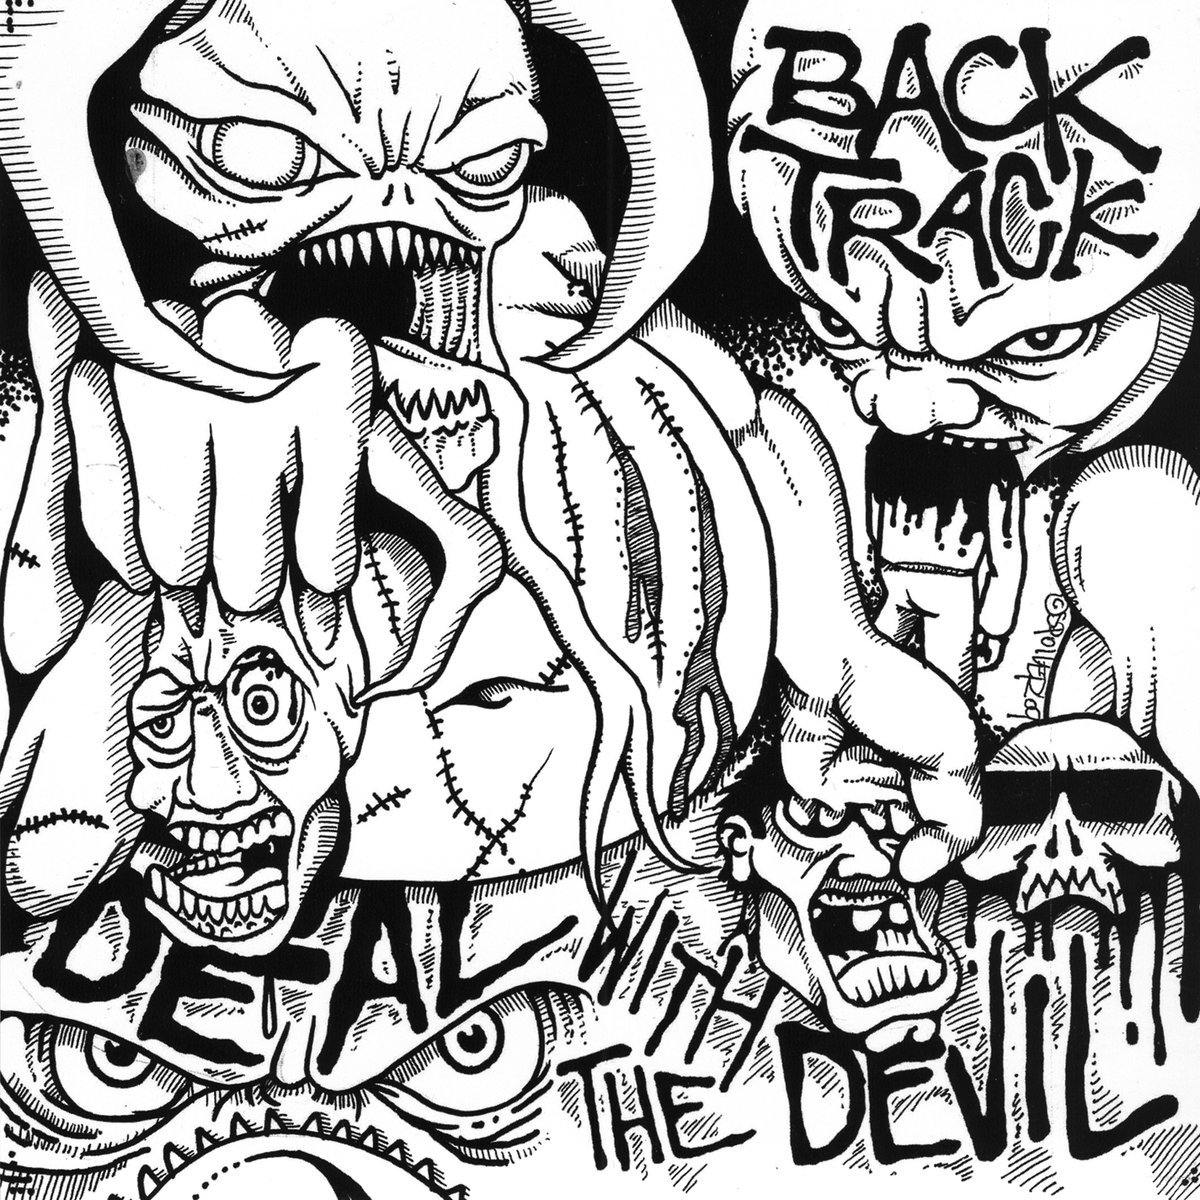 Buy – Backtrack "Deal With The Devil" 7" – Band & Music Merch – Cold Cuts Merch